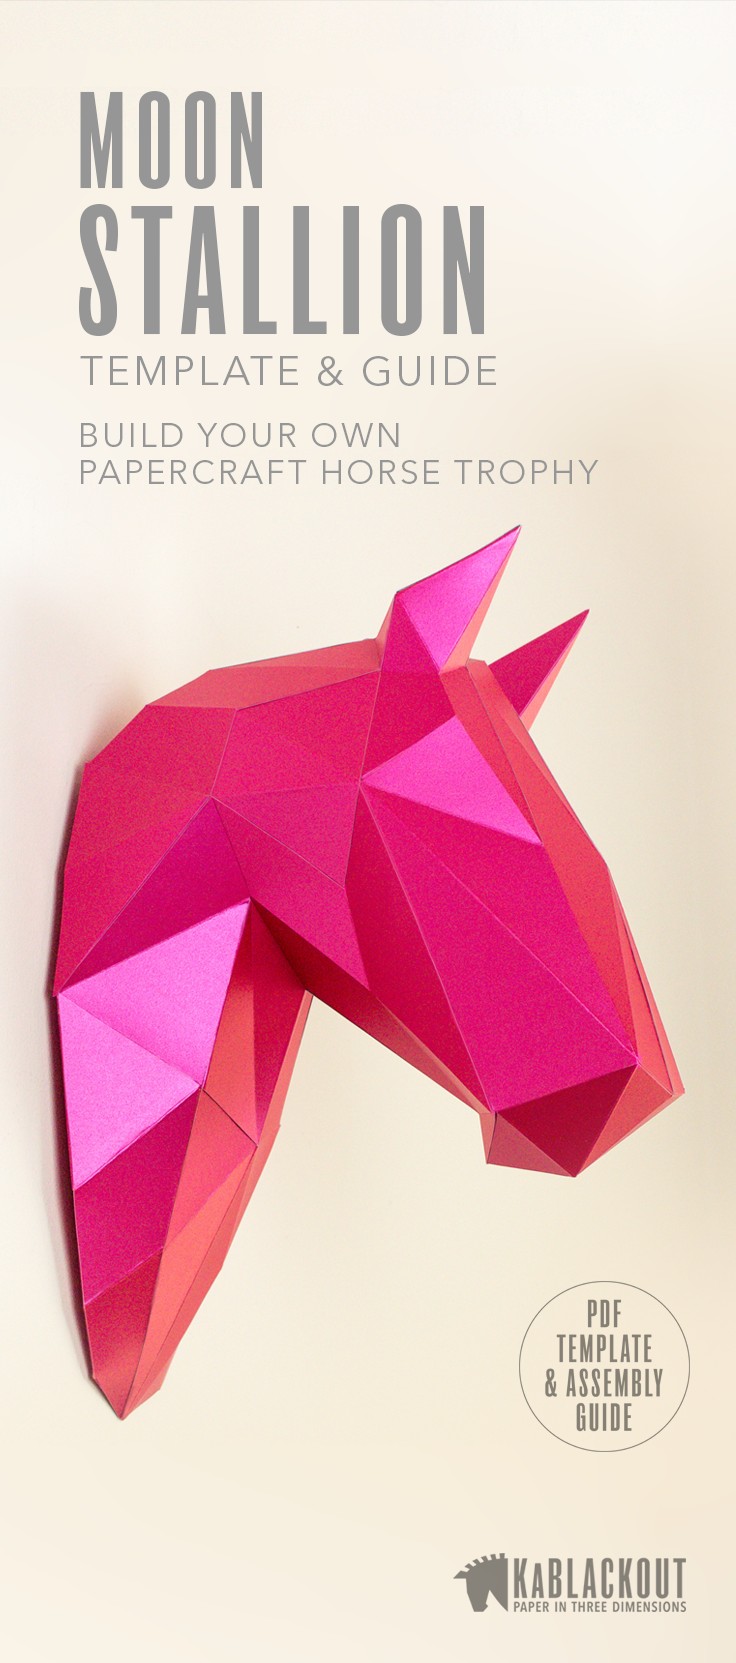 Papercraft Unicorn Horse Papercraft Diy Horse Template Low Poly Horse 3d Wall Trophy